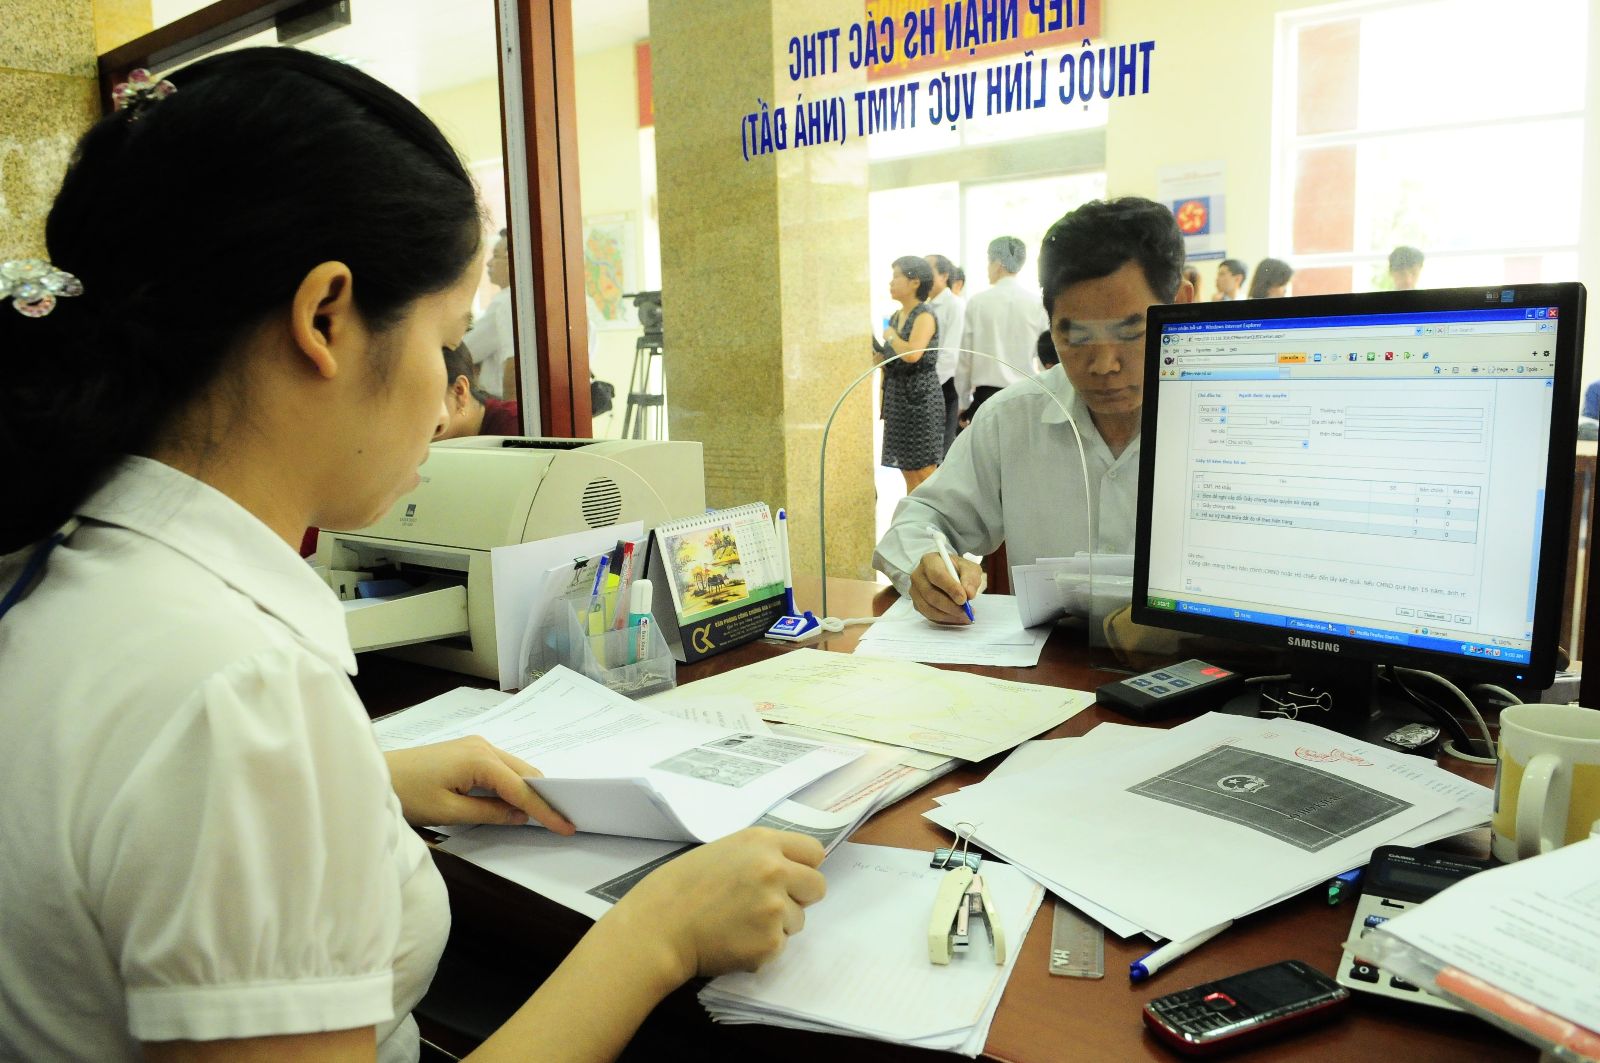 Latest procedures for registration of civil status change and correction in Vietnam